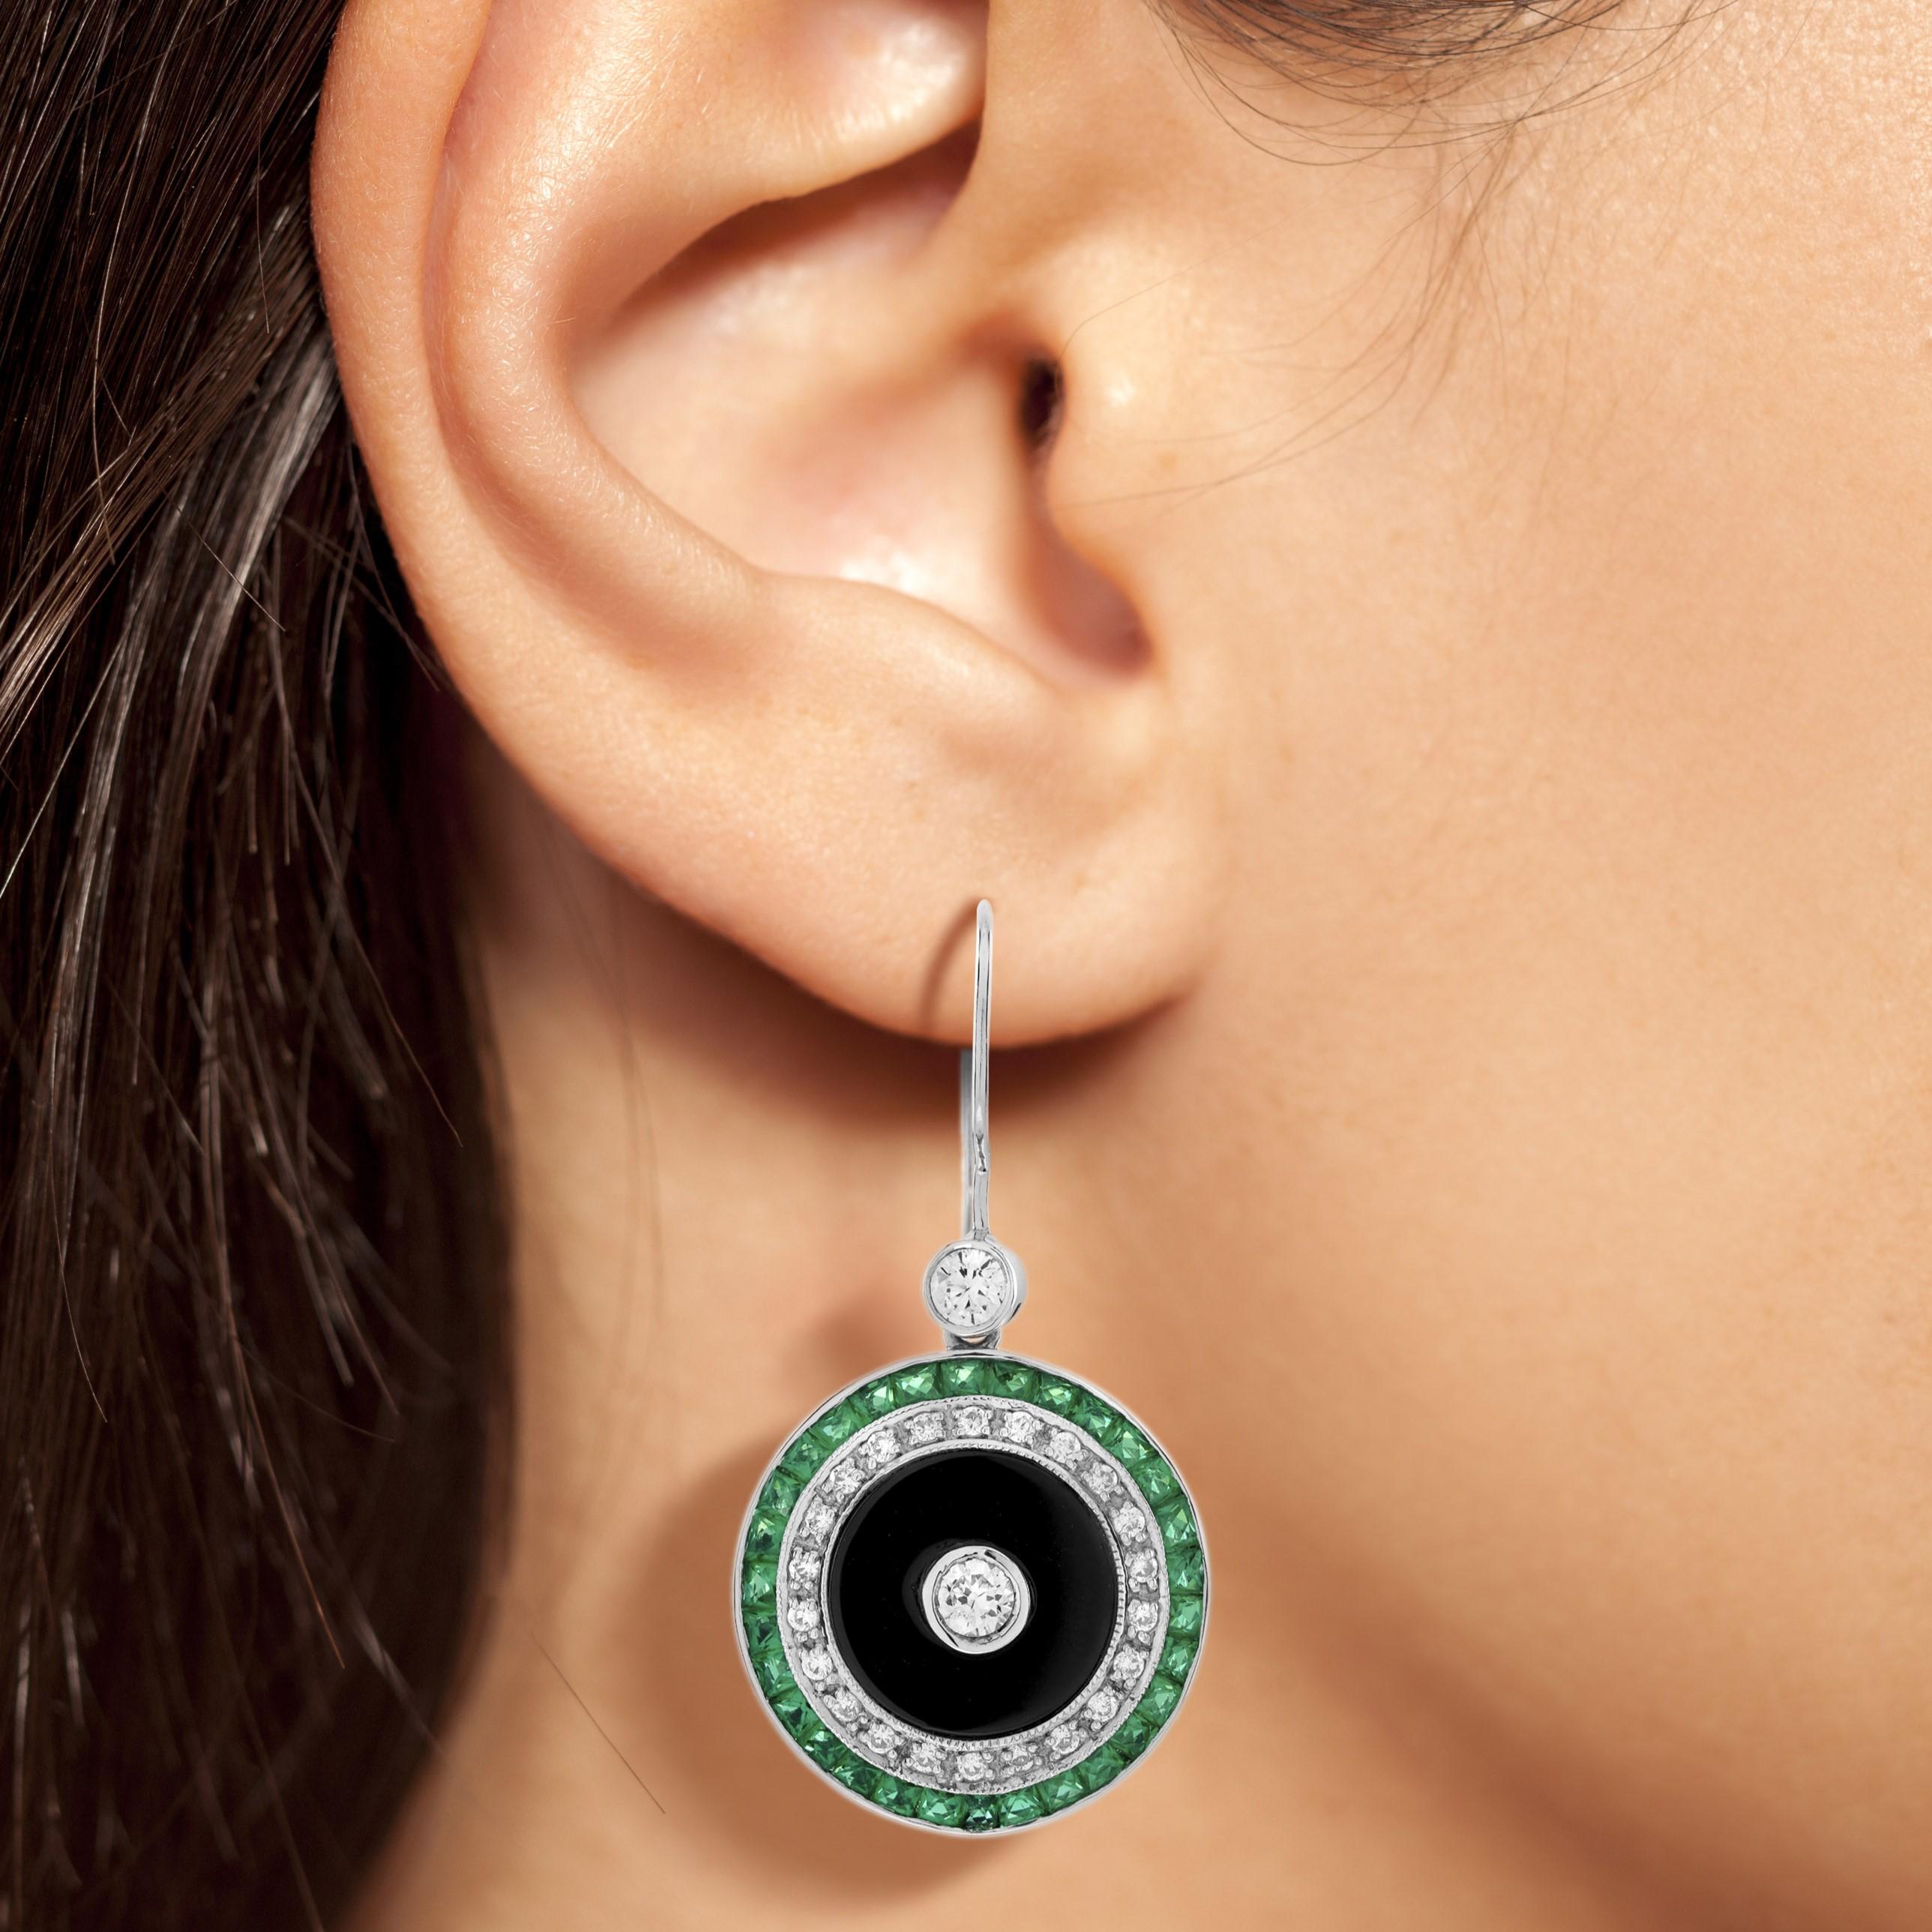 Charming Art Deco style target earrings featuring a diamond center surrounded onyx, round brilliant cut diamonds and French cut emeralds crafted in 14k white gold. Designed perfectly for a special day wear, pair them with the same design ring for